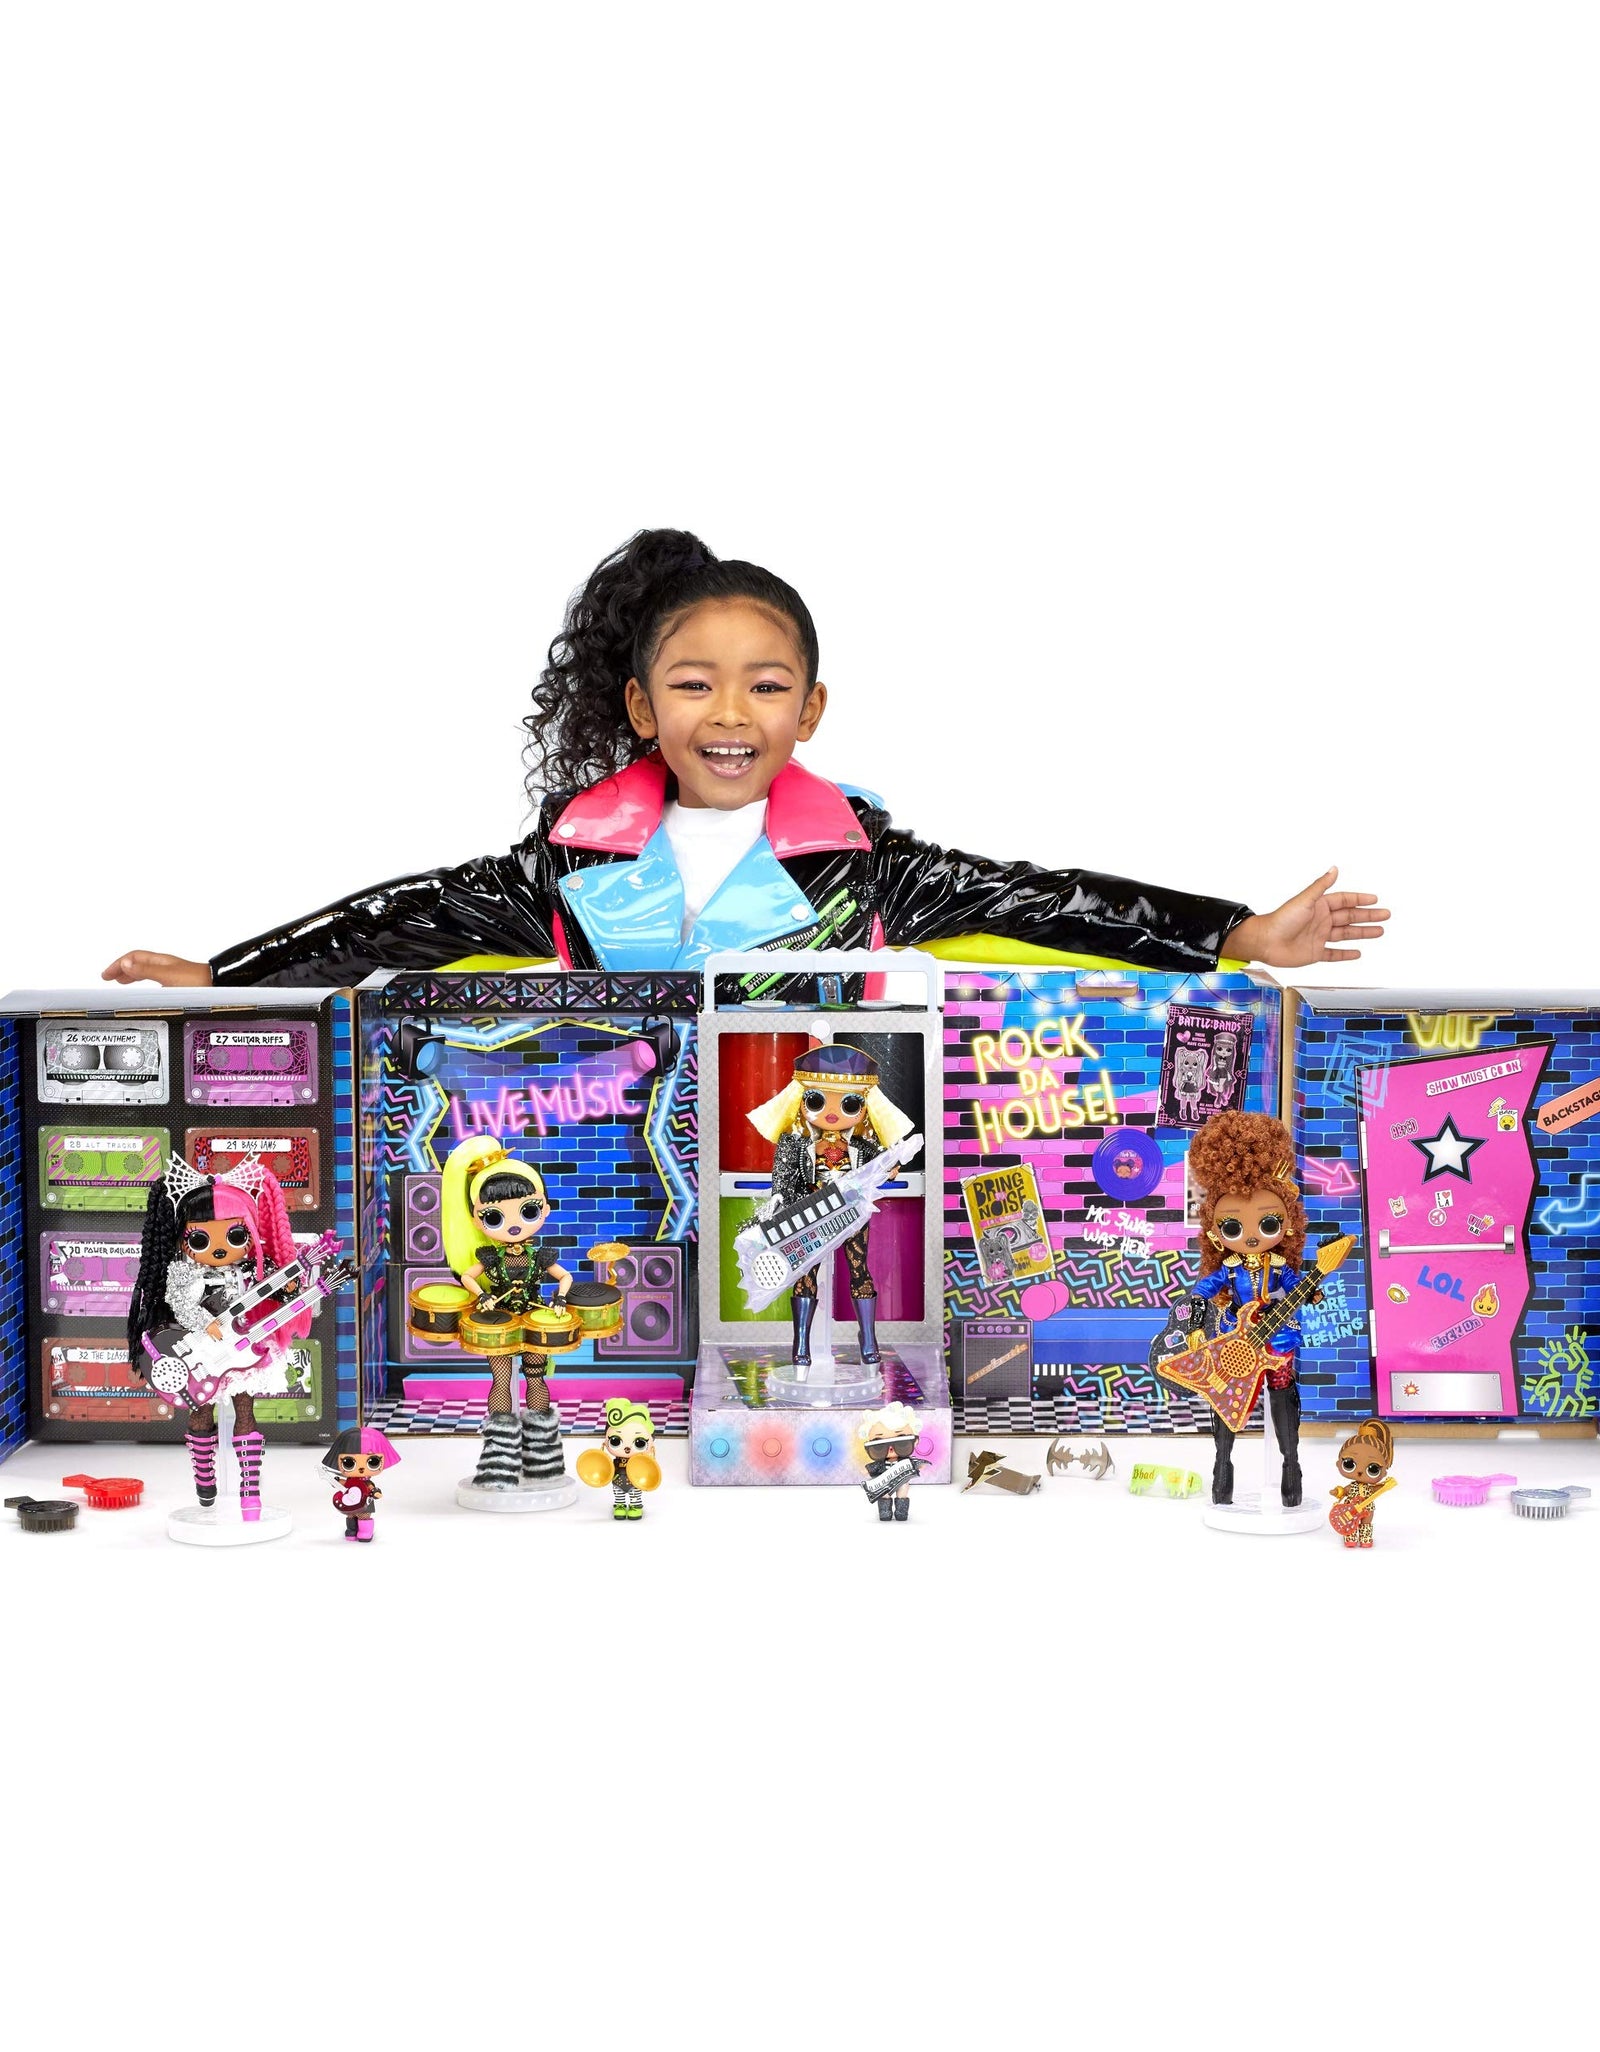 LOL Surprise OMG Remix Super Surprise with 70+ Surprises, Plays Music, 4 Fashion Dolls And 4 Dolls (Sisters), Rock Instruments, Boom Box Packaging, And Rock Band Accessories | Ages 4+